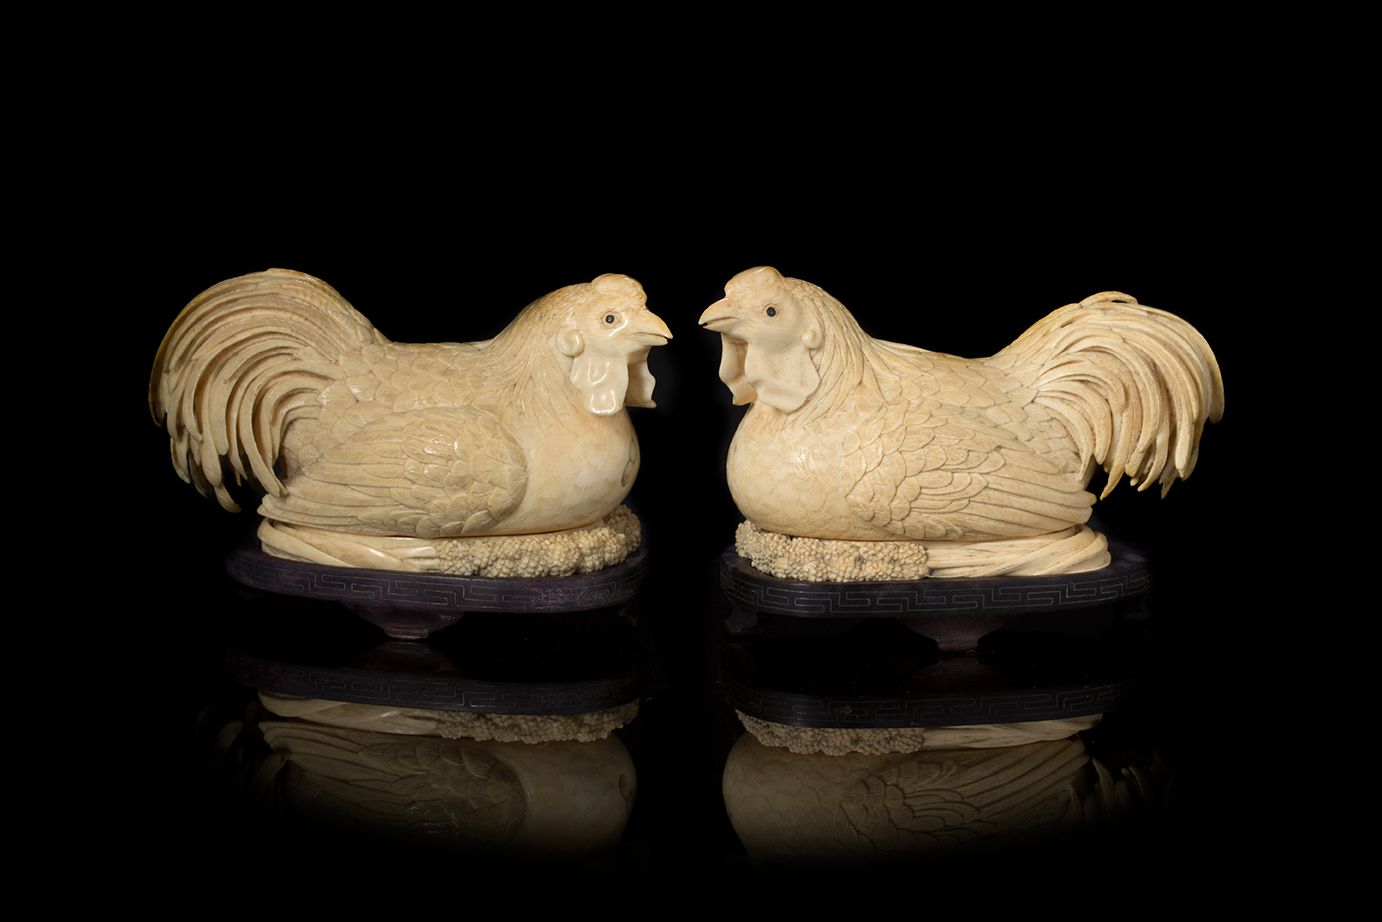 CHINE DYNASTIE QING, XIXe SIÈCLE ~ Pair of boxes
Carved ivory imitating the shap&hellip;